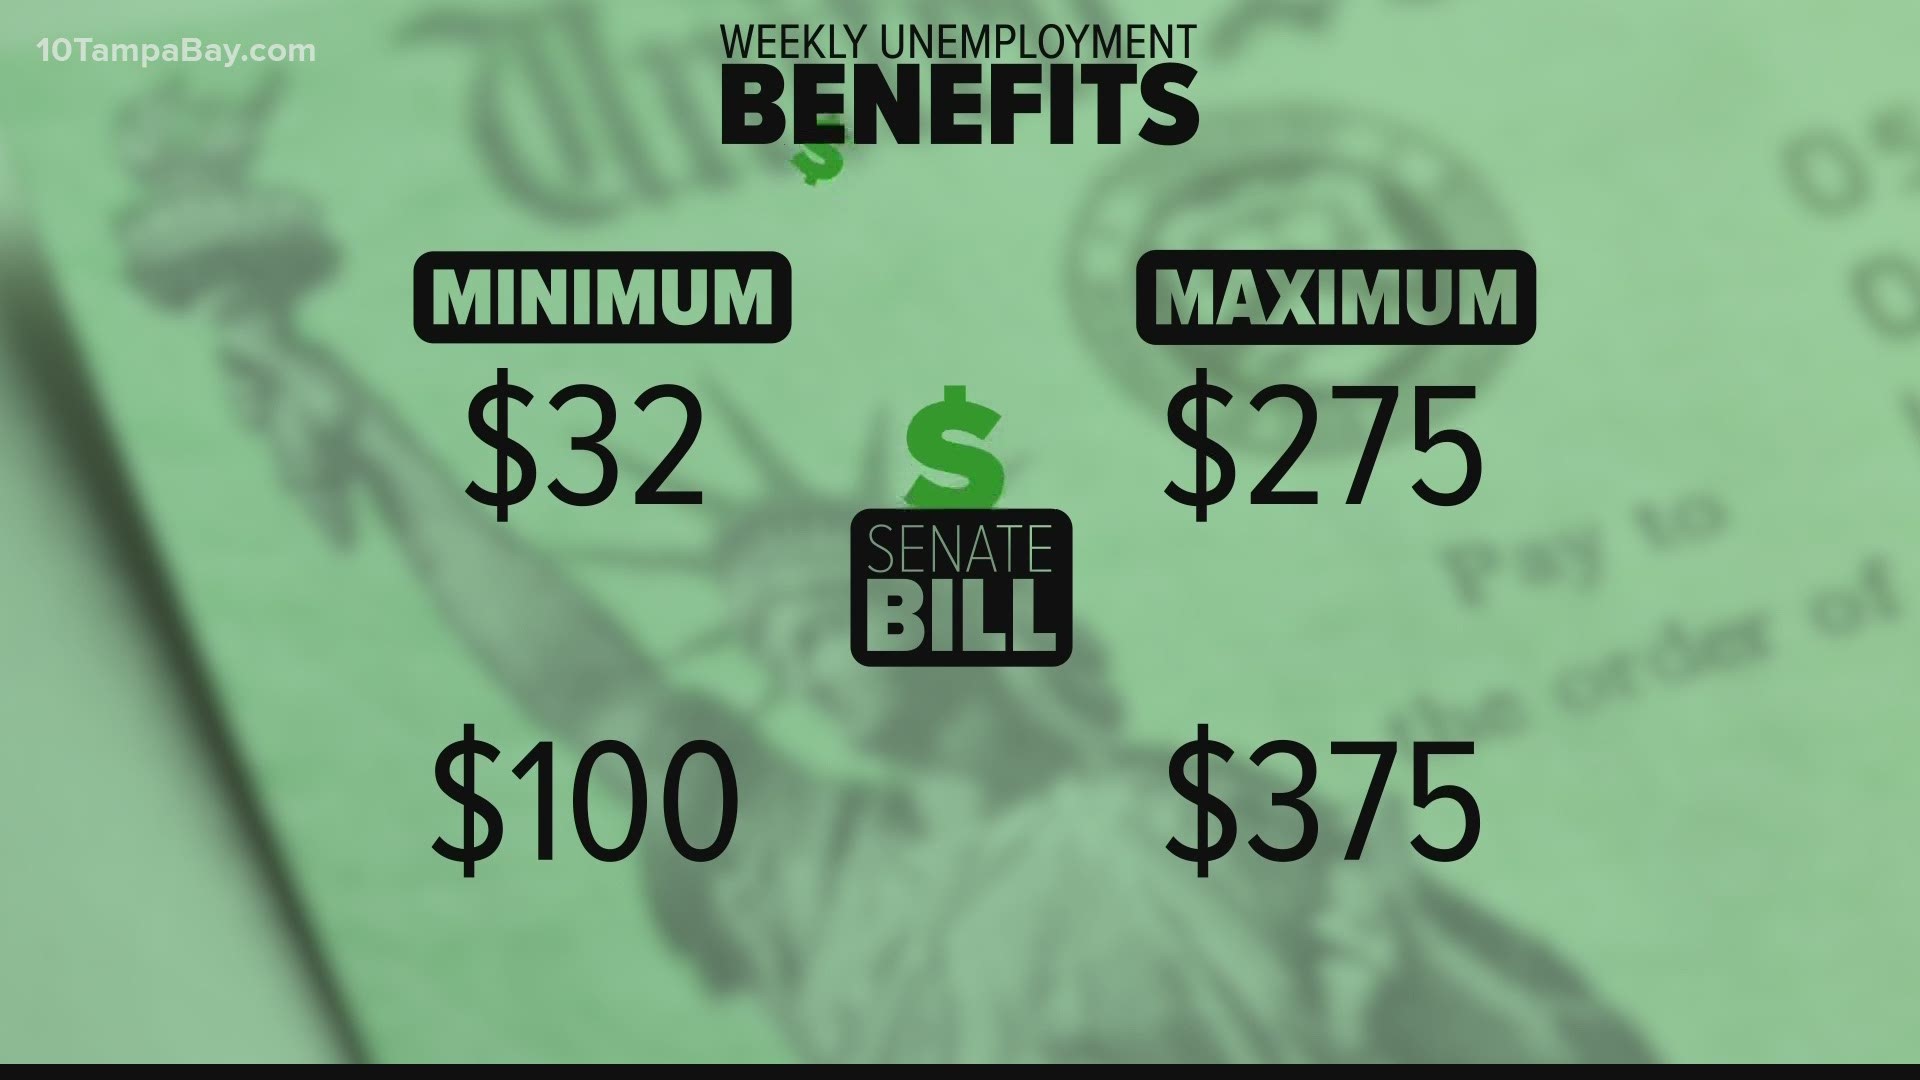 The governor’s comments come as the state Senate is moving on a bill to increase maximum benefits from $275 a week to $375 a week.